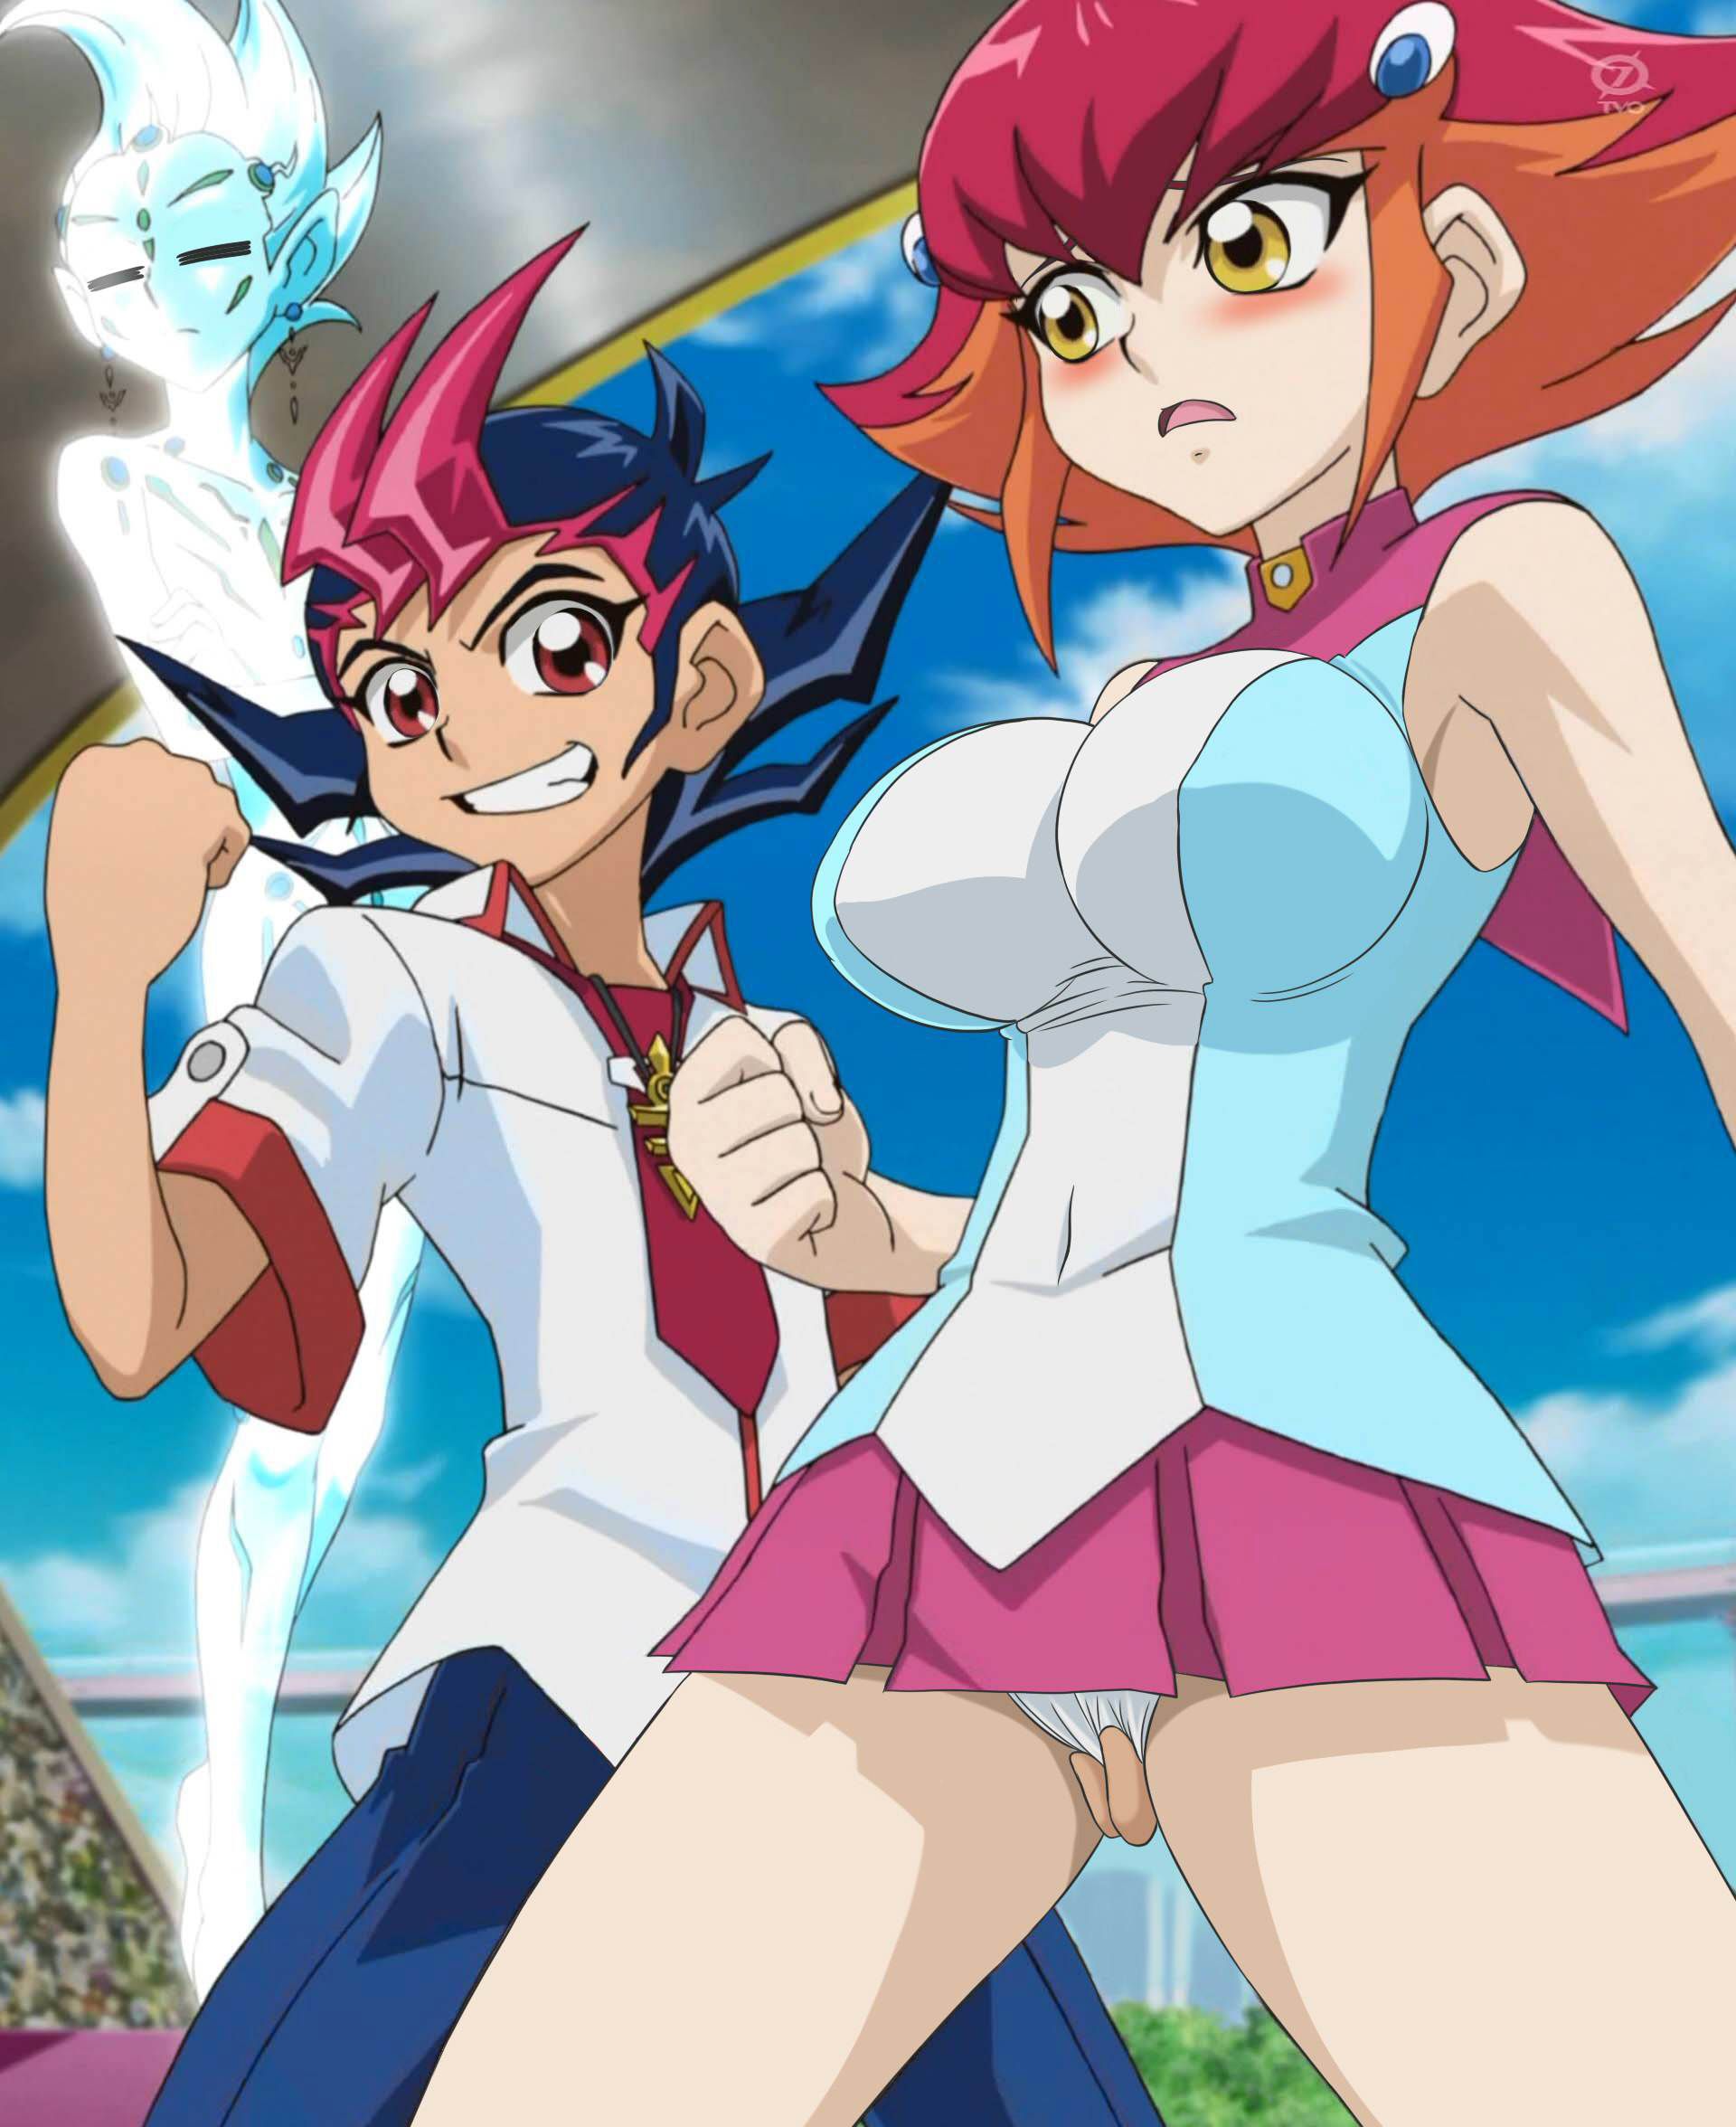 [Yu-Gi-oh] stripping of the heroine such as Black magician Girl Photoshop part2 8